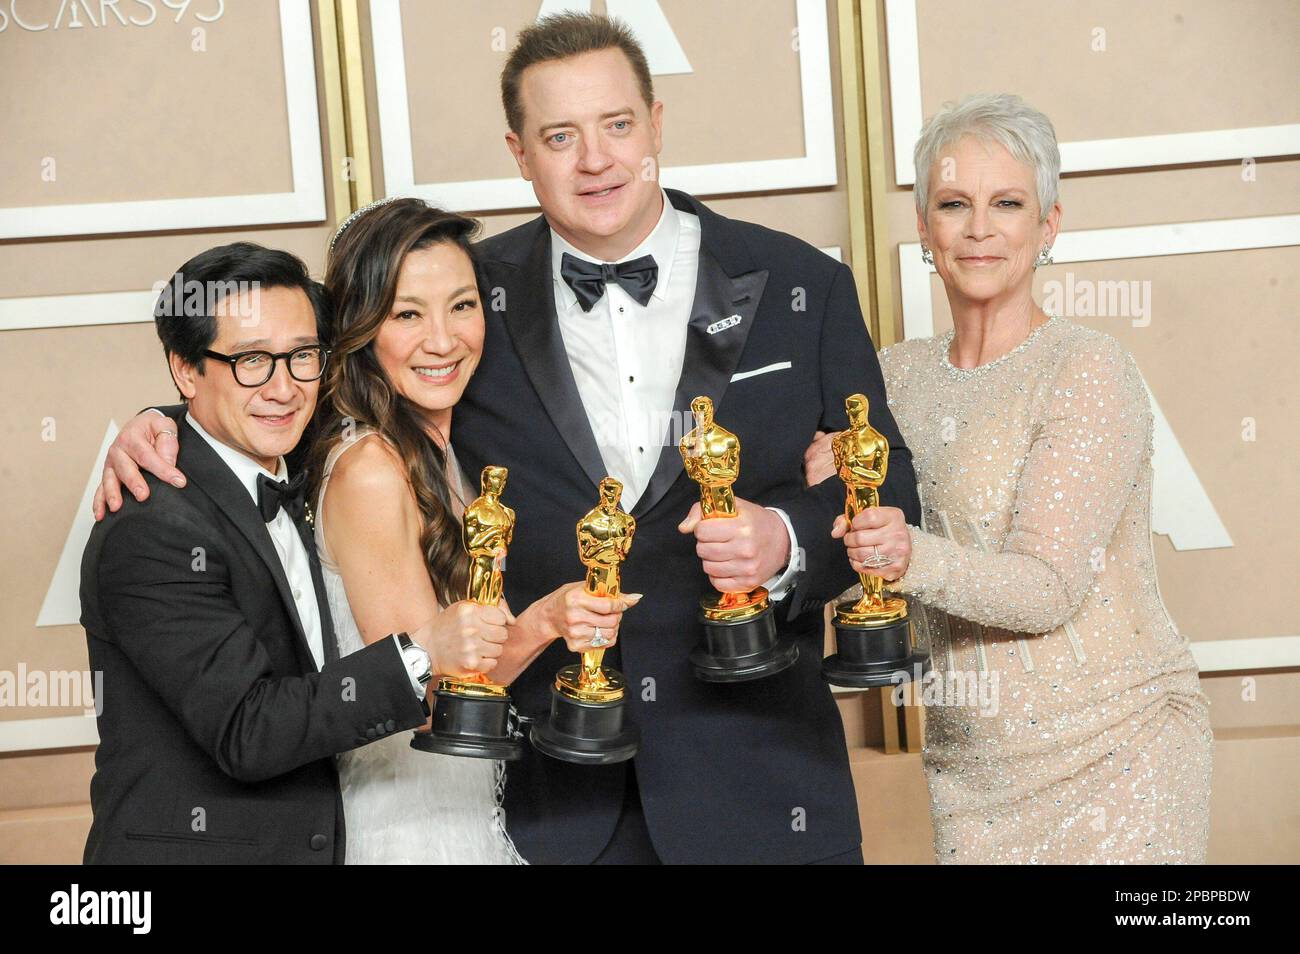 Los Angeles, California. 12th Mar, 2023. KE Huy Quan, Michelle Yeoh, Jamie Lee Curtis, Brendan Fraser nella sala stampa per 95th Academy Awards - Photo Room, Dolby Theatre, Los Angeles, CA 12 marzo 2023. Credit: Elizabeth Goodenough/Everett Collection/Alamy Live News Foto Stock